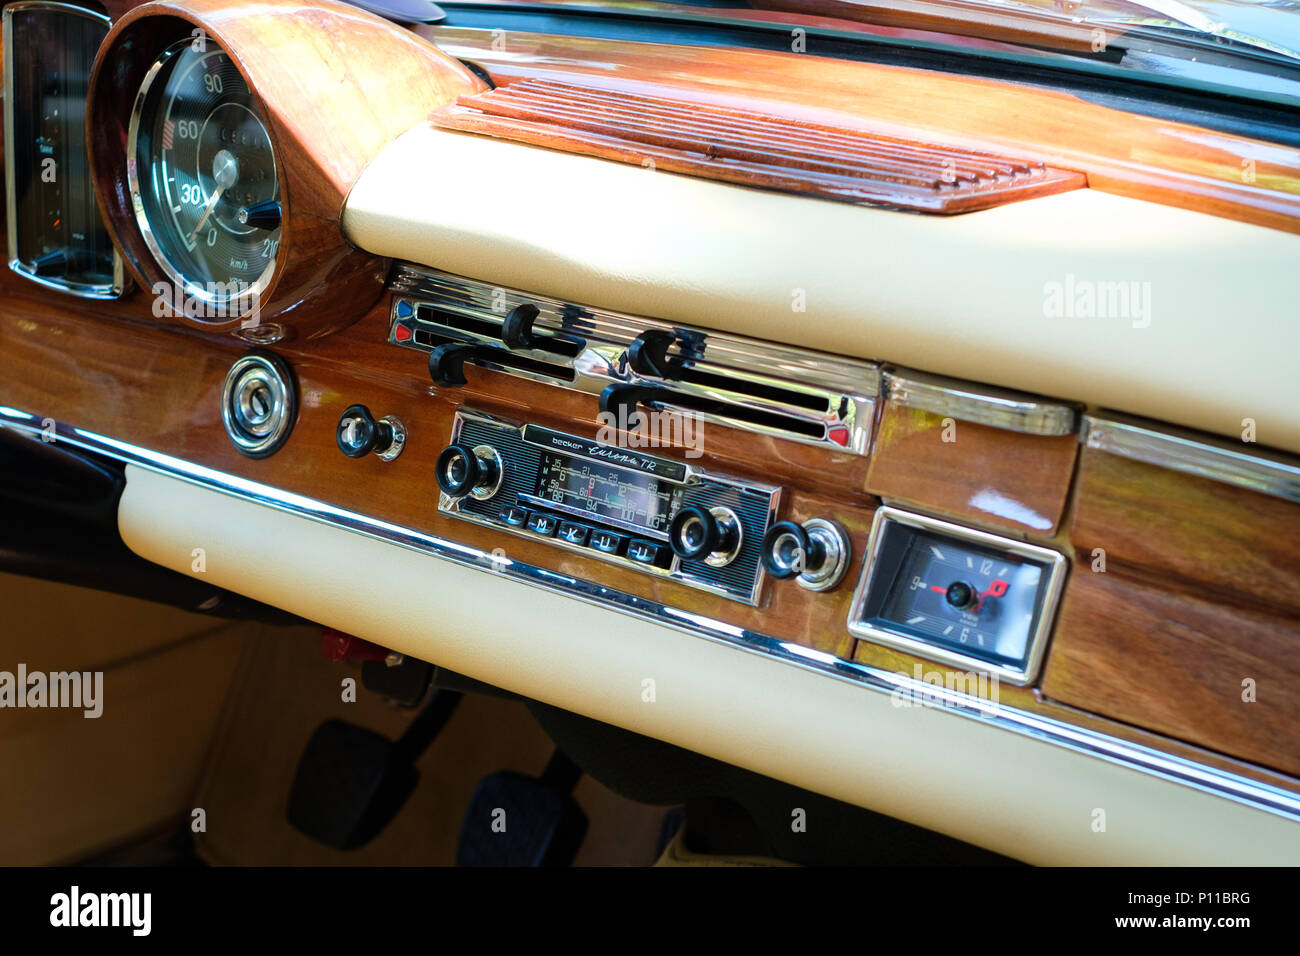 Berlin, Germany - june 09, 2018: Dashboard, radio and interior of beautiful vintage car cockpit at Classic Days, a Oldtimer  event for vintage cars an Stock Photo